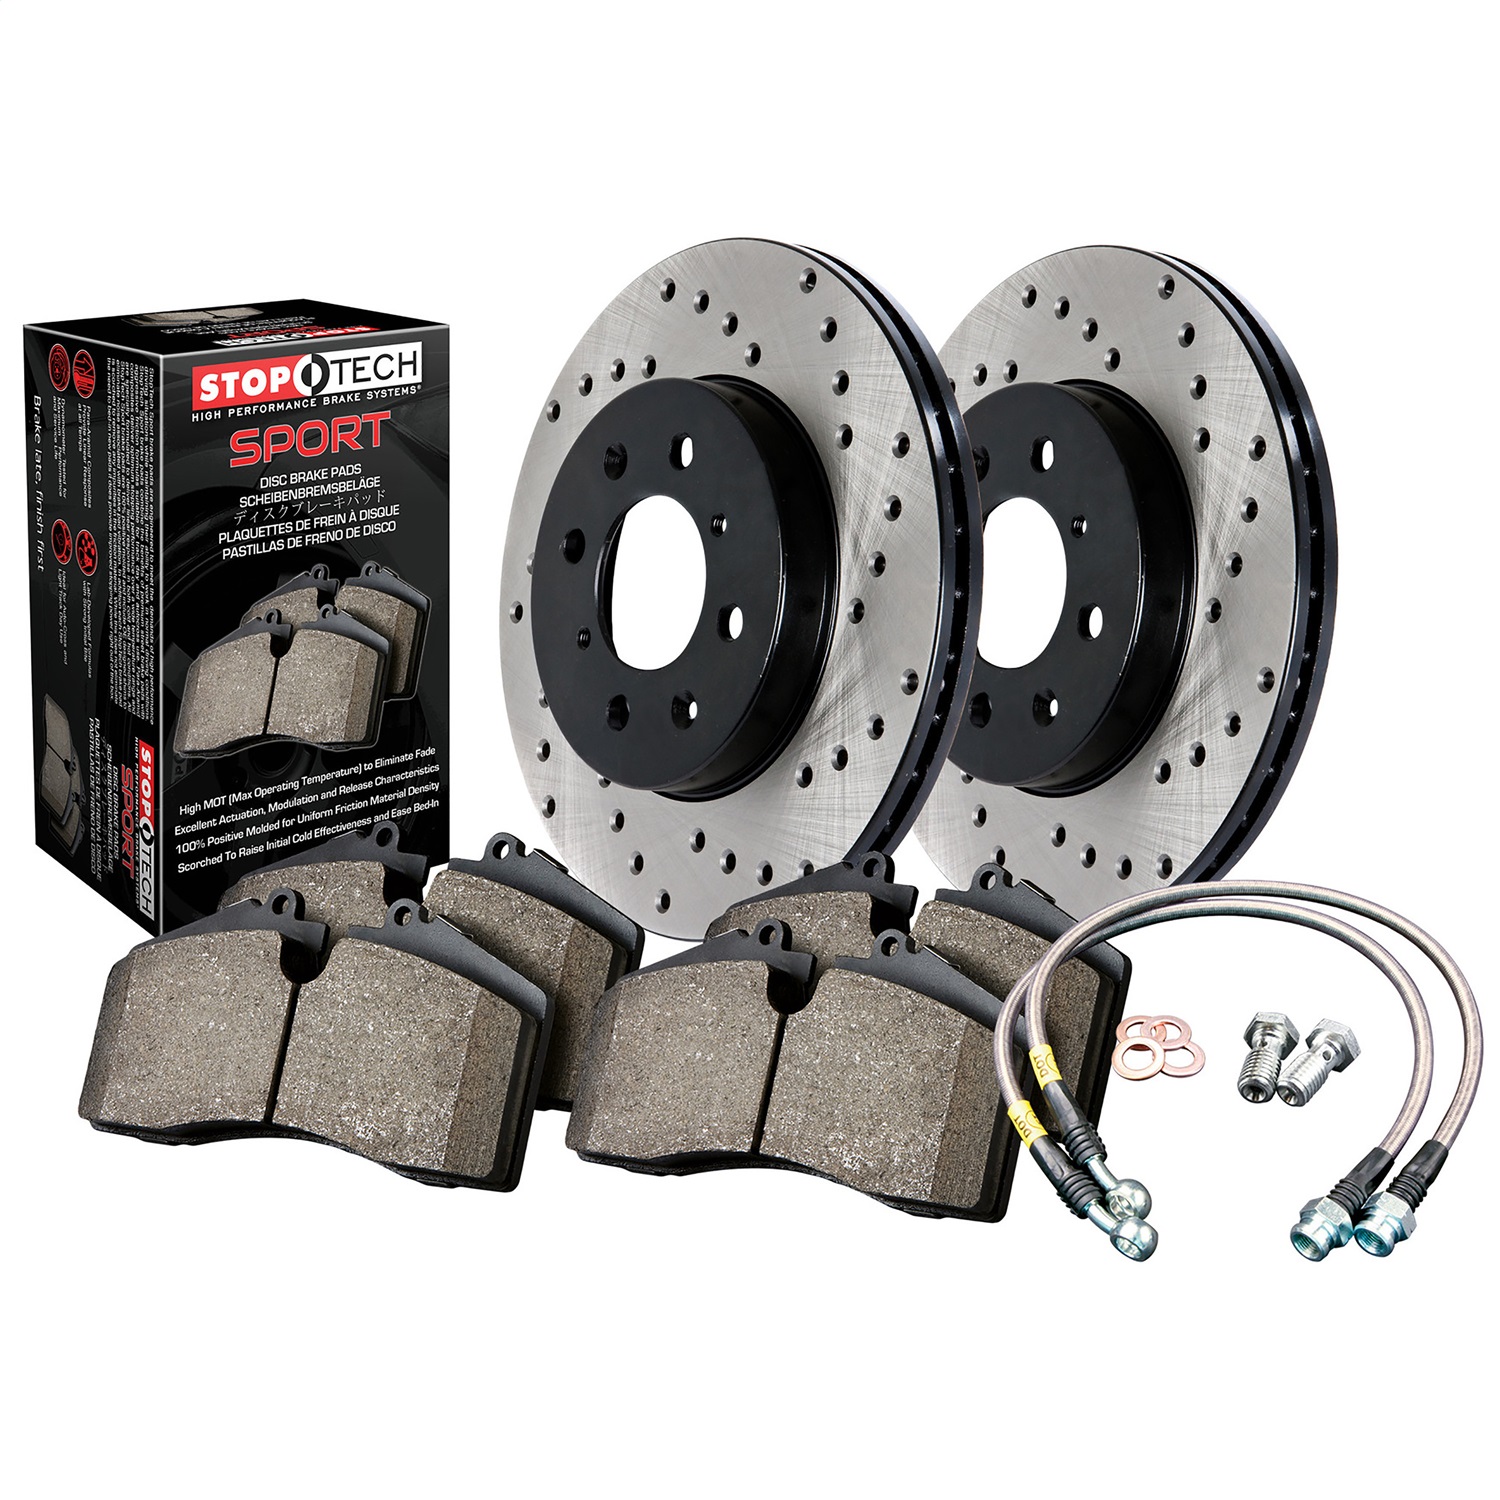 StopTech 979.39002F Sport Disc Brake Kit w/Cross-Drilled Rotors Fits 13-18 Focus